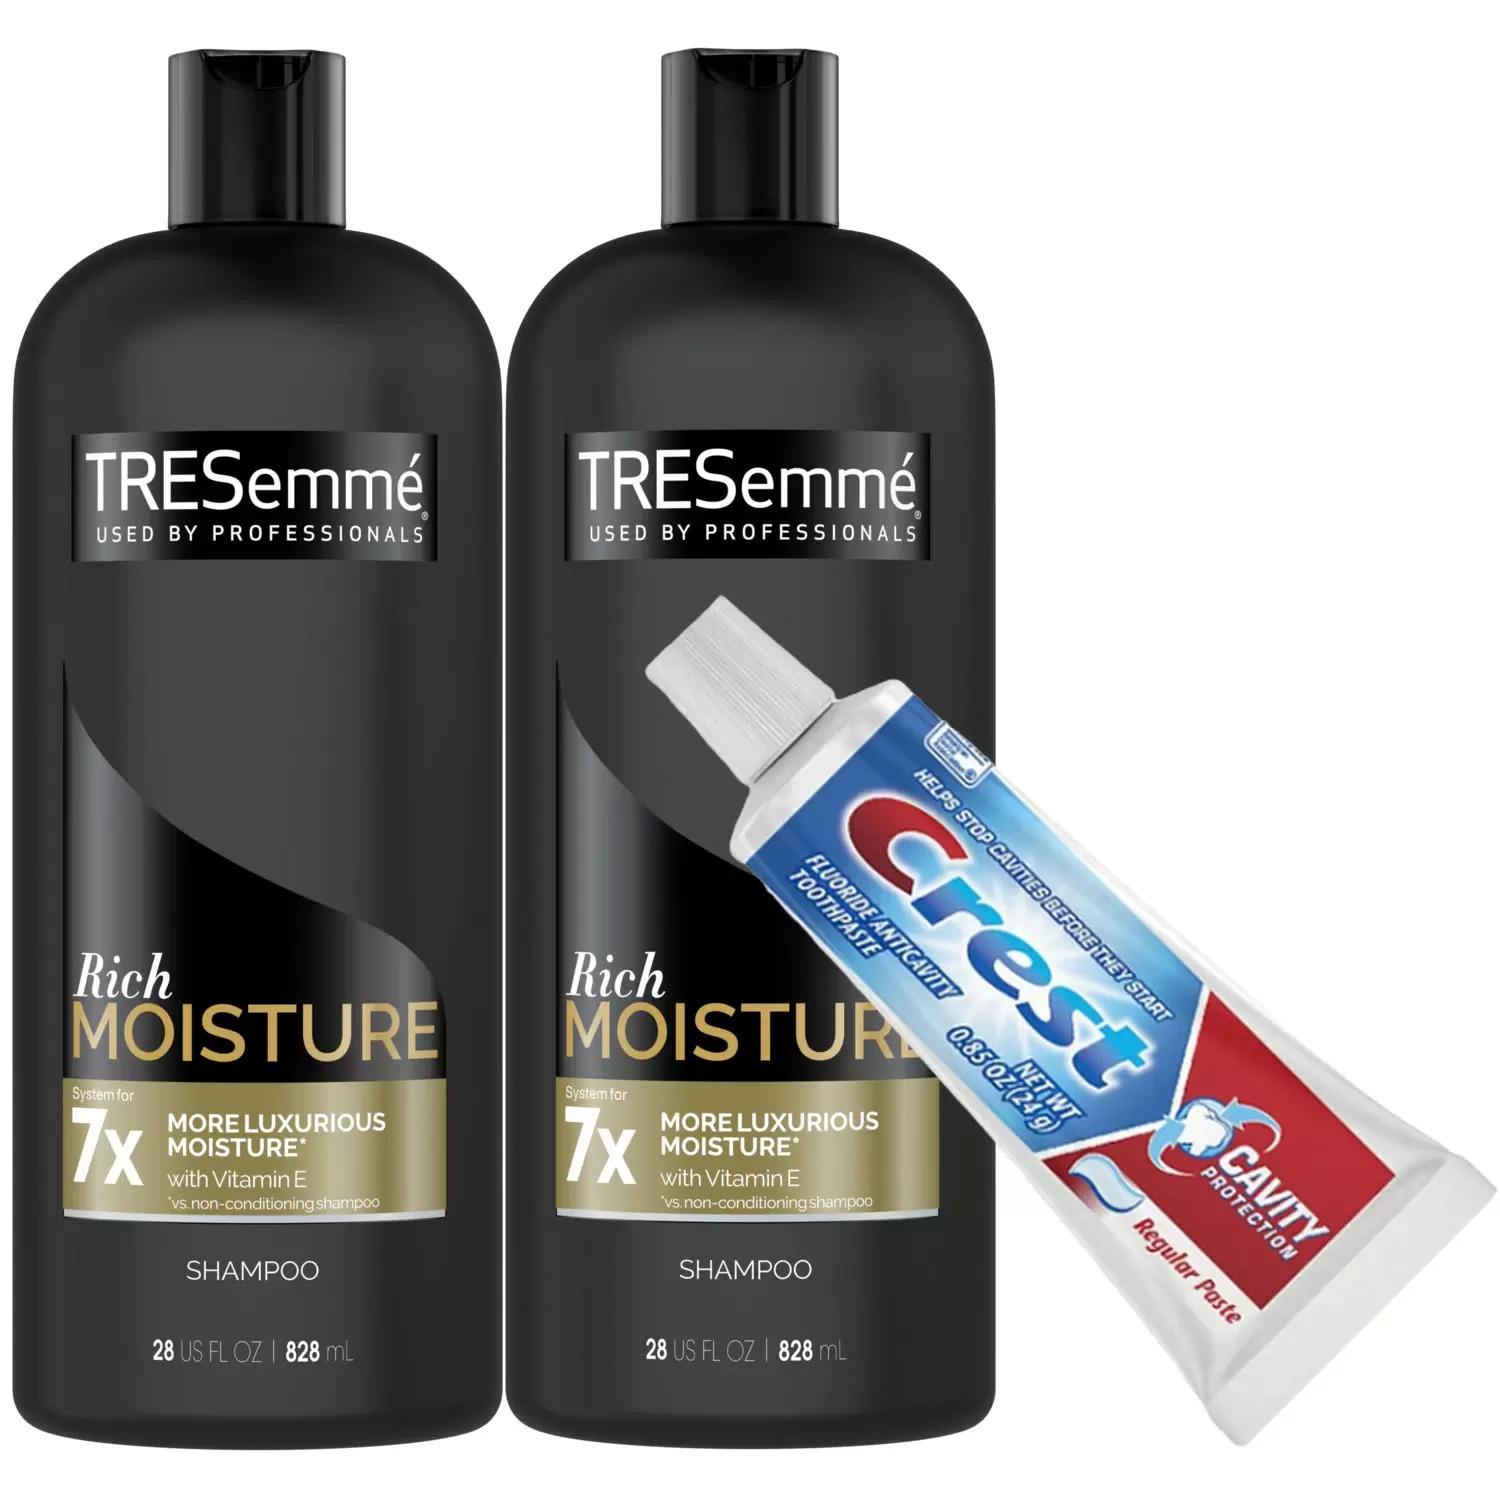 2 Tresemme Shampoo or Conditioner with Crest Toothpaste for $3.37